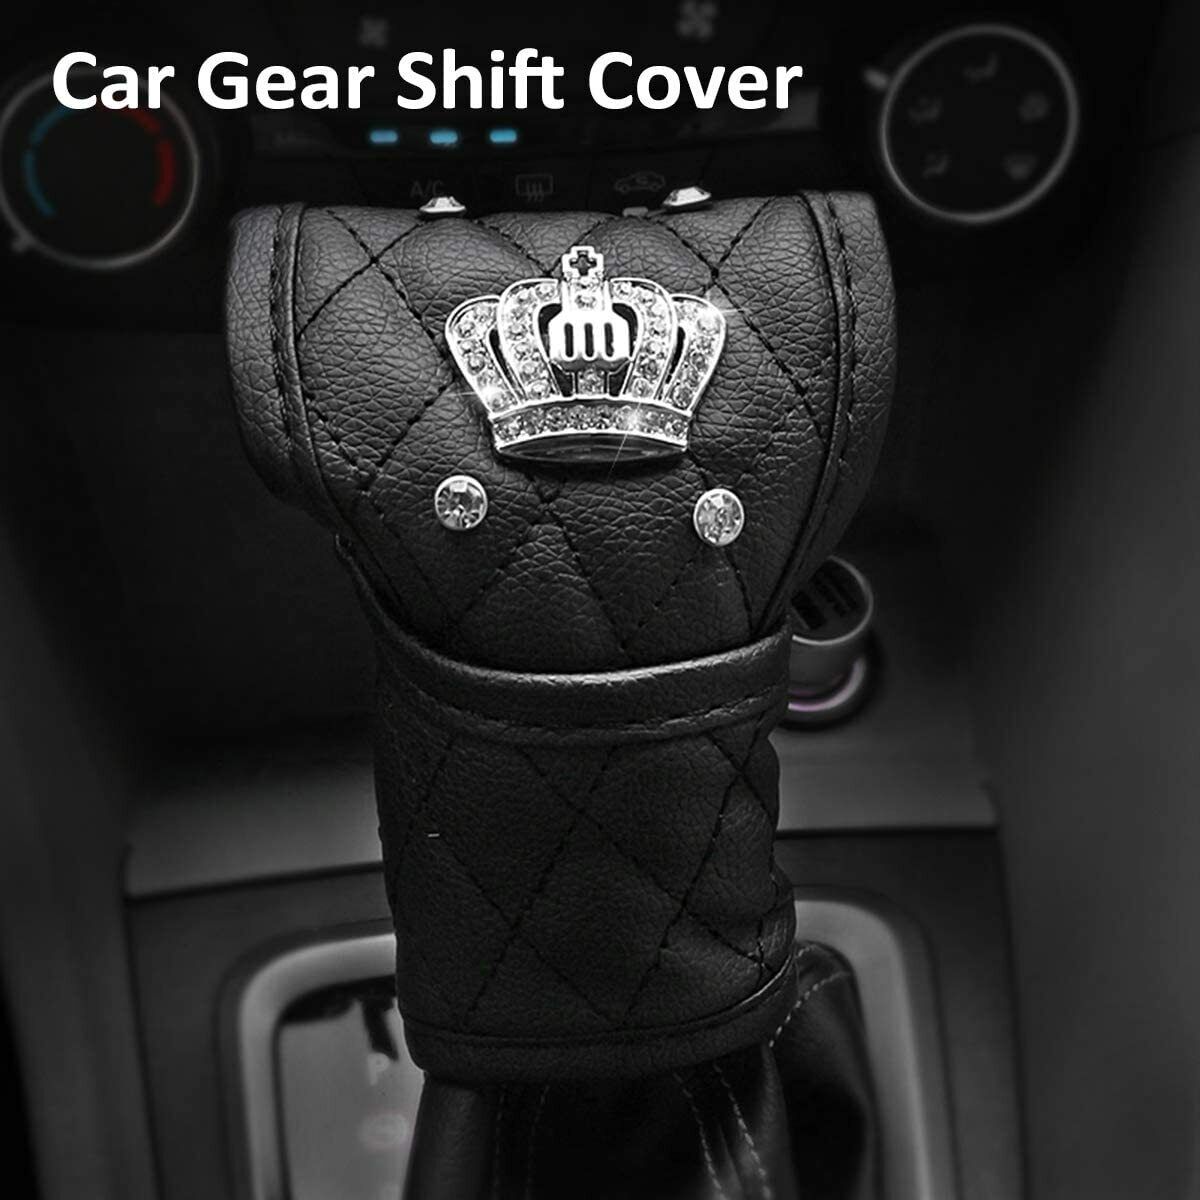 Bling Car Accessories for Women Girl Shift Knob Cover Gear Interior Accessories